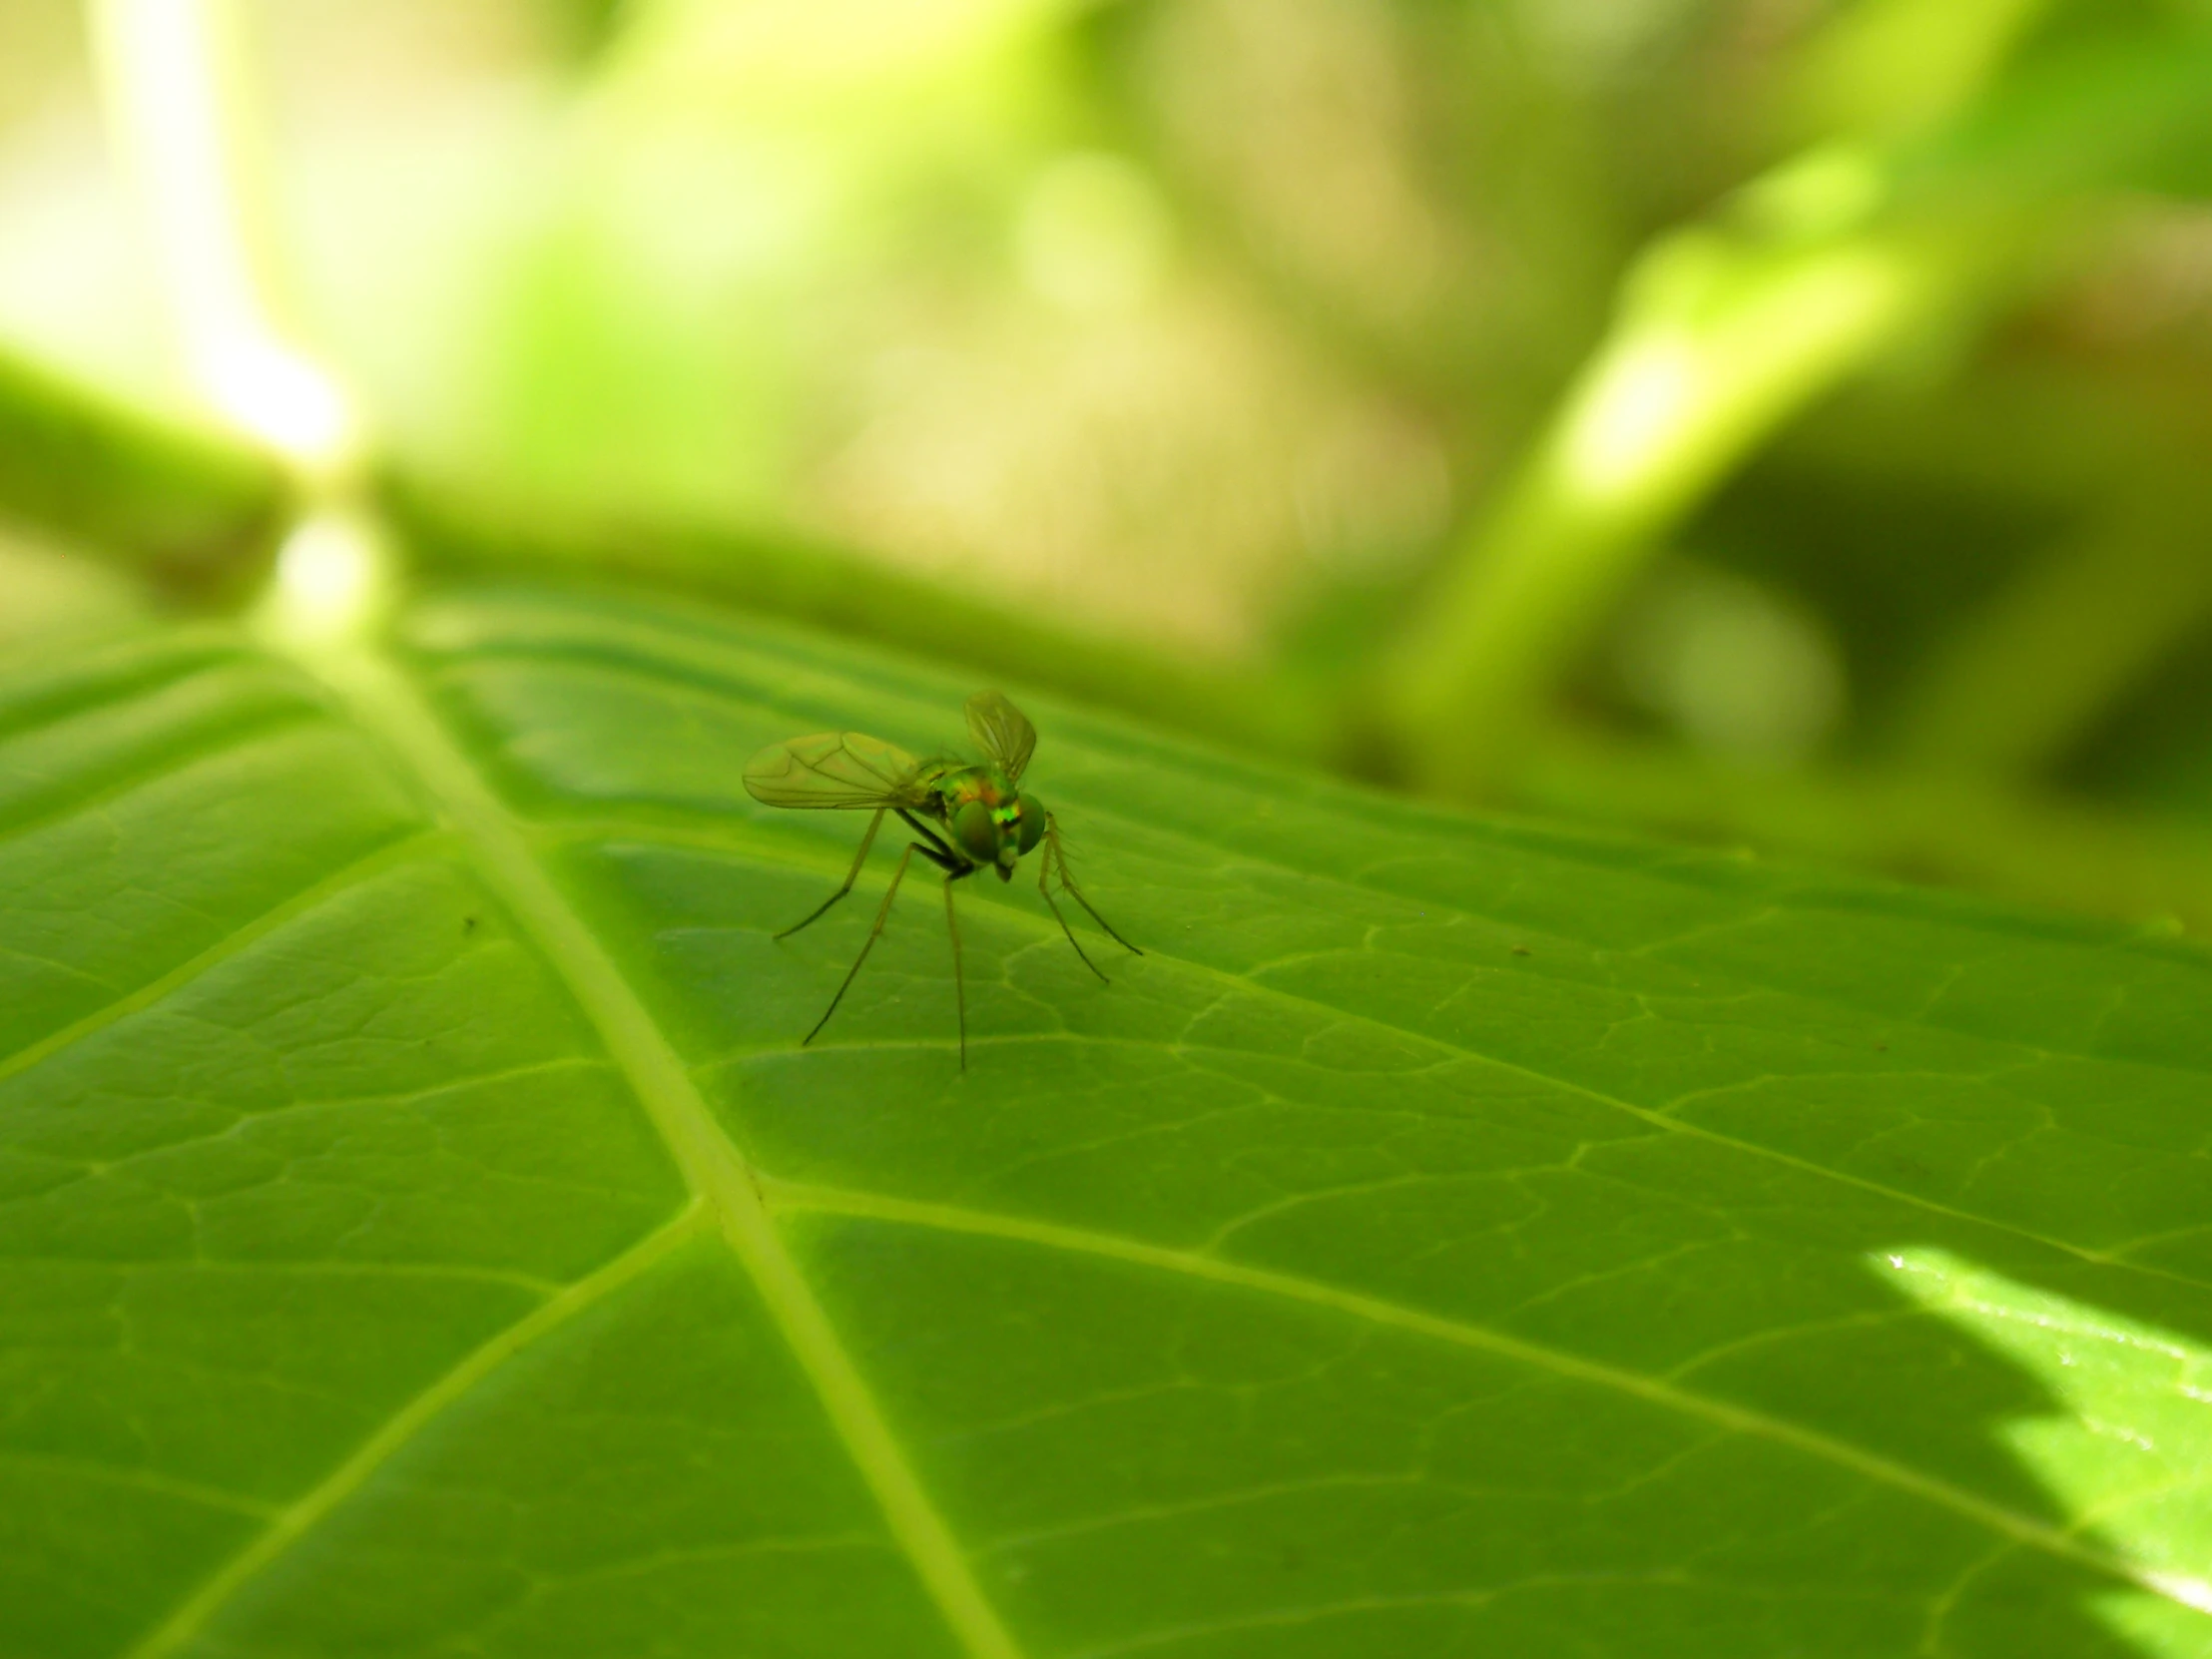 a fly on a green leaf looking at the camera